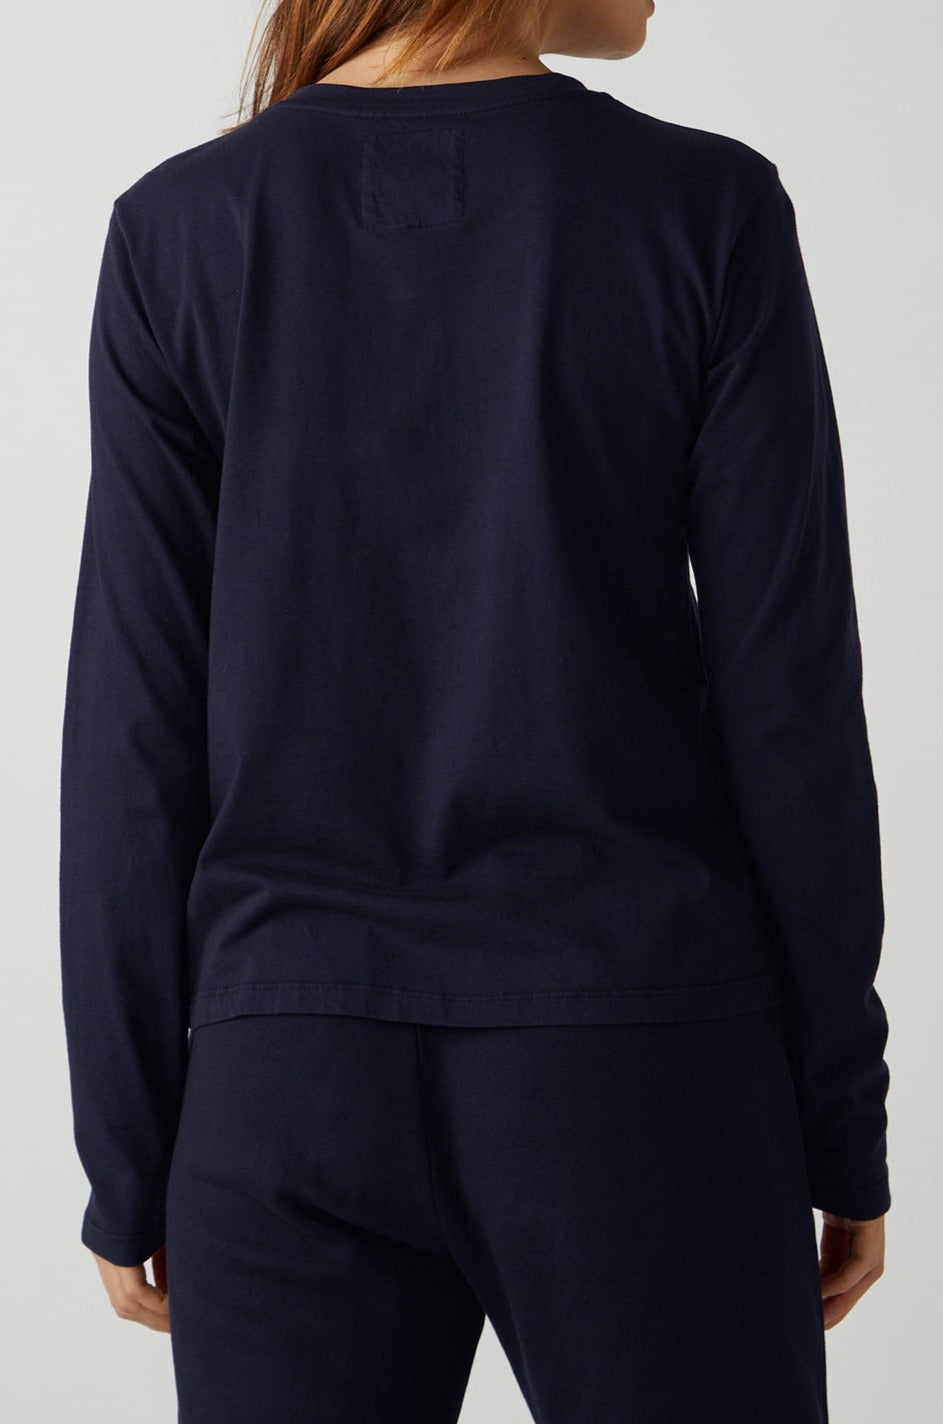 Vicente Tee in navy with Zuma Sweatpant back-26007101243585